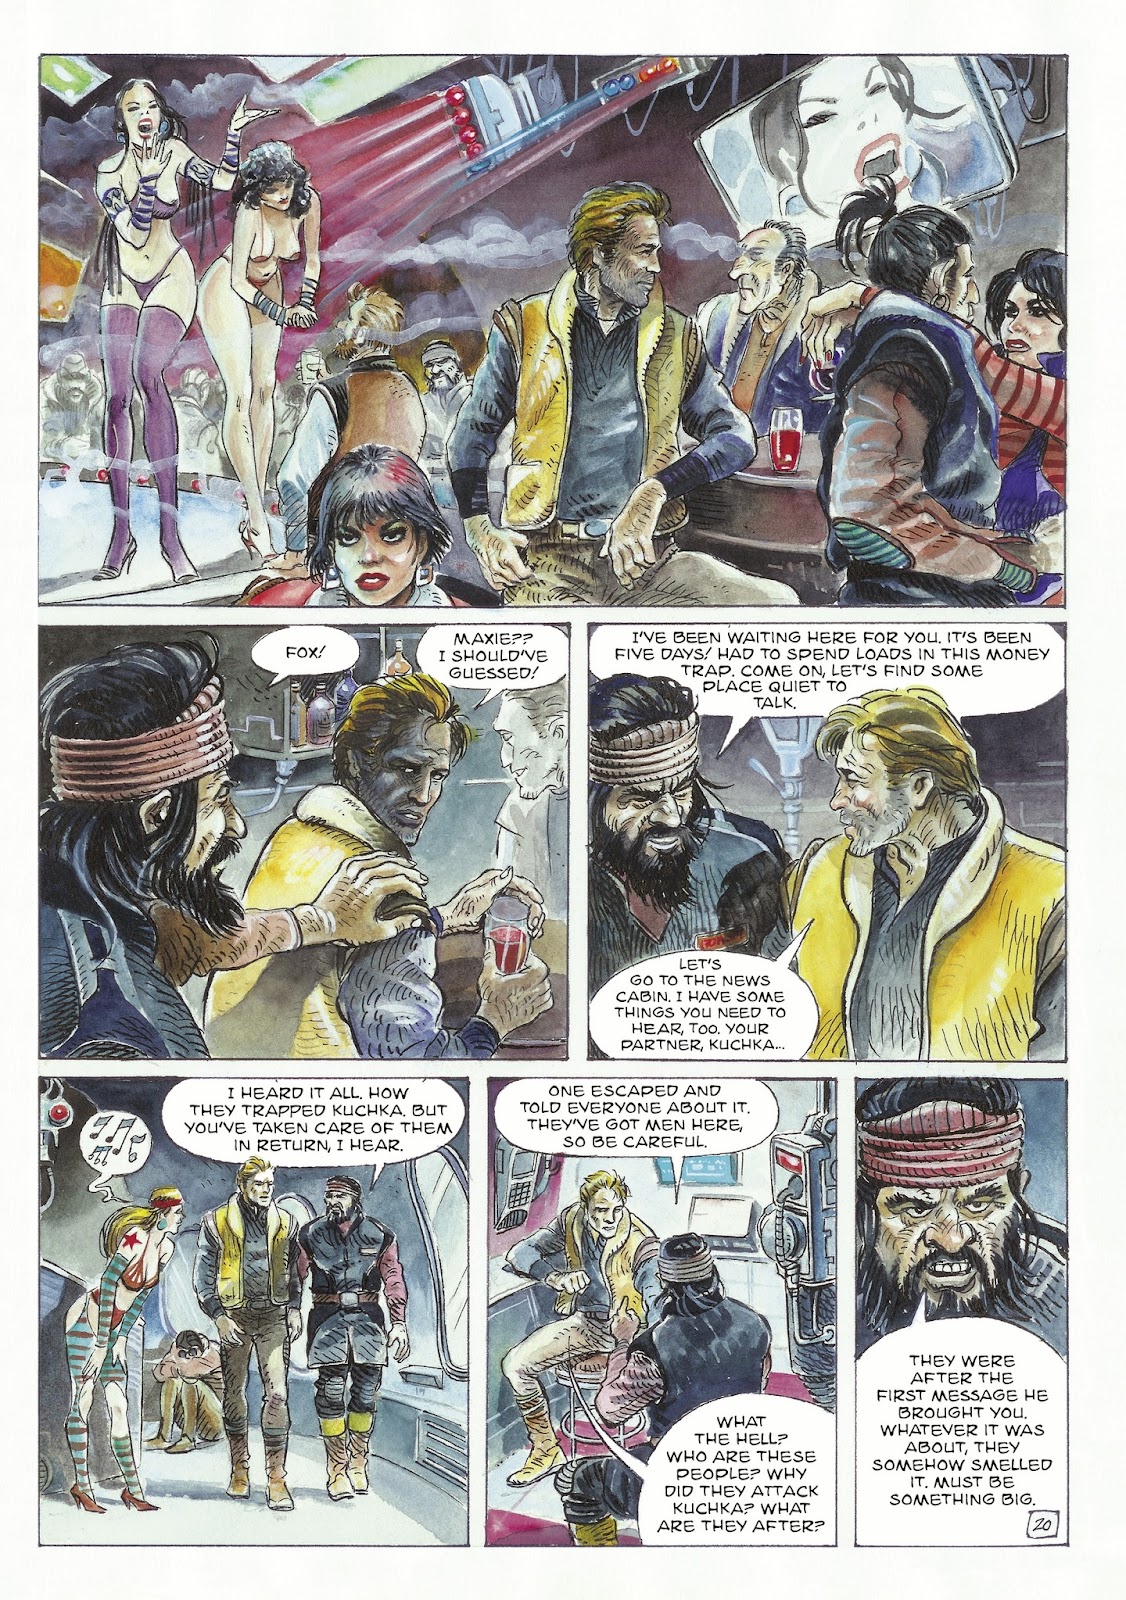 The Man With the Bear issue 1 - Page 22